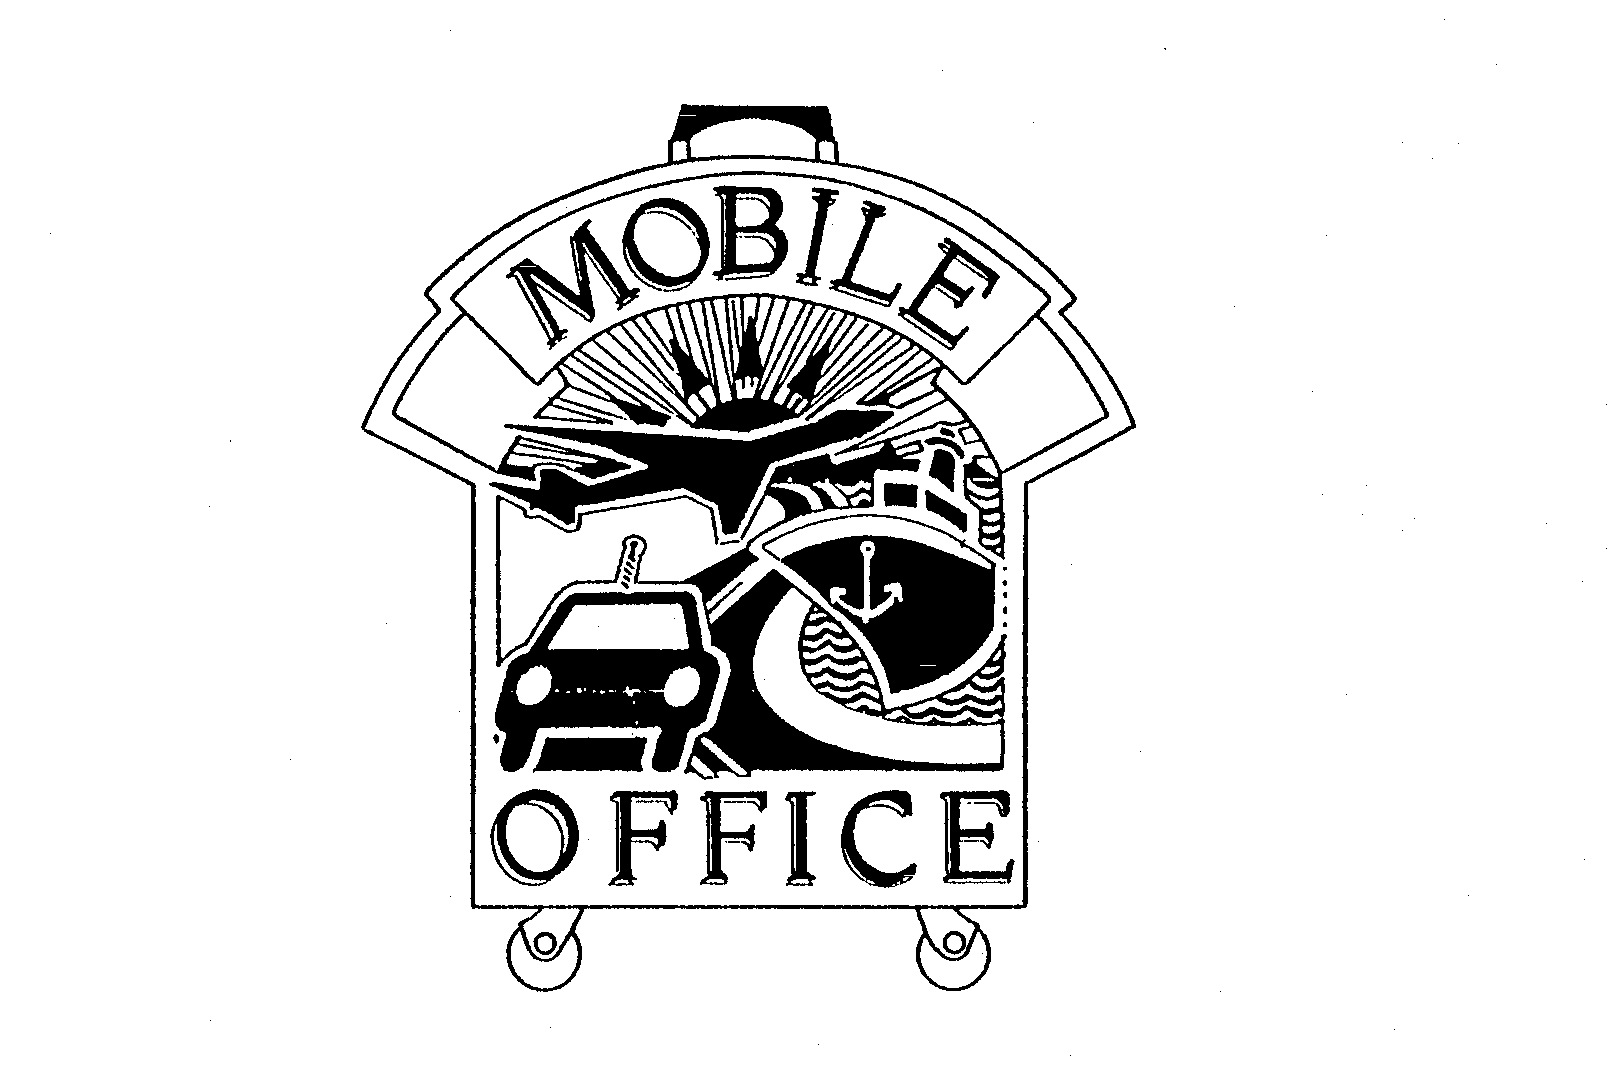  MOBILE OFFICE